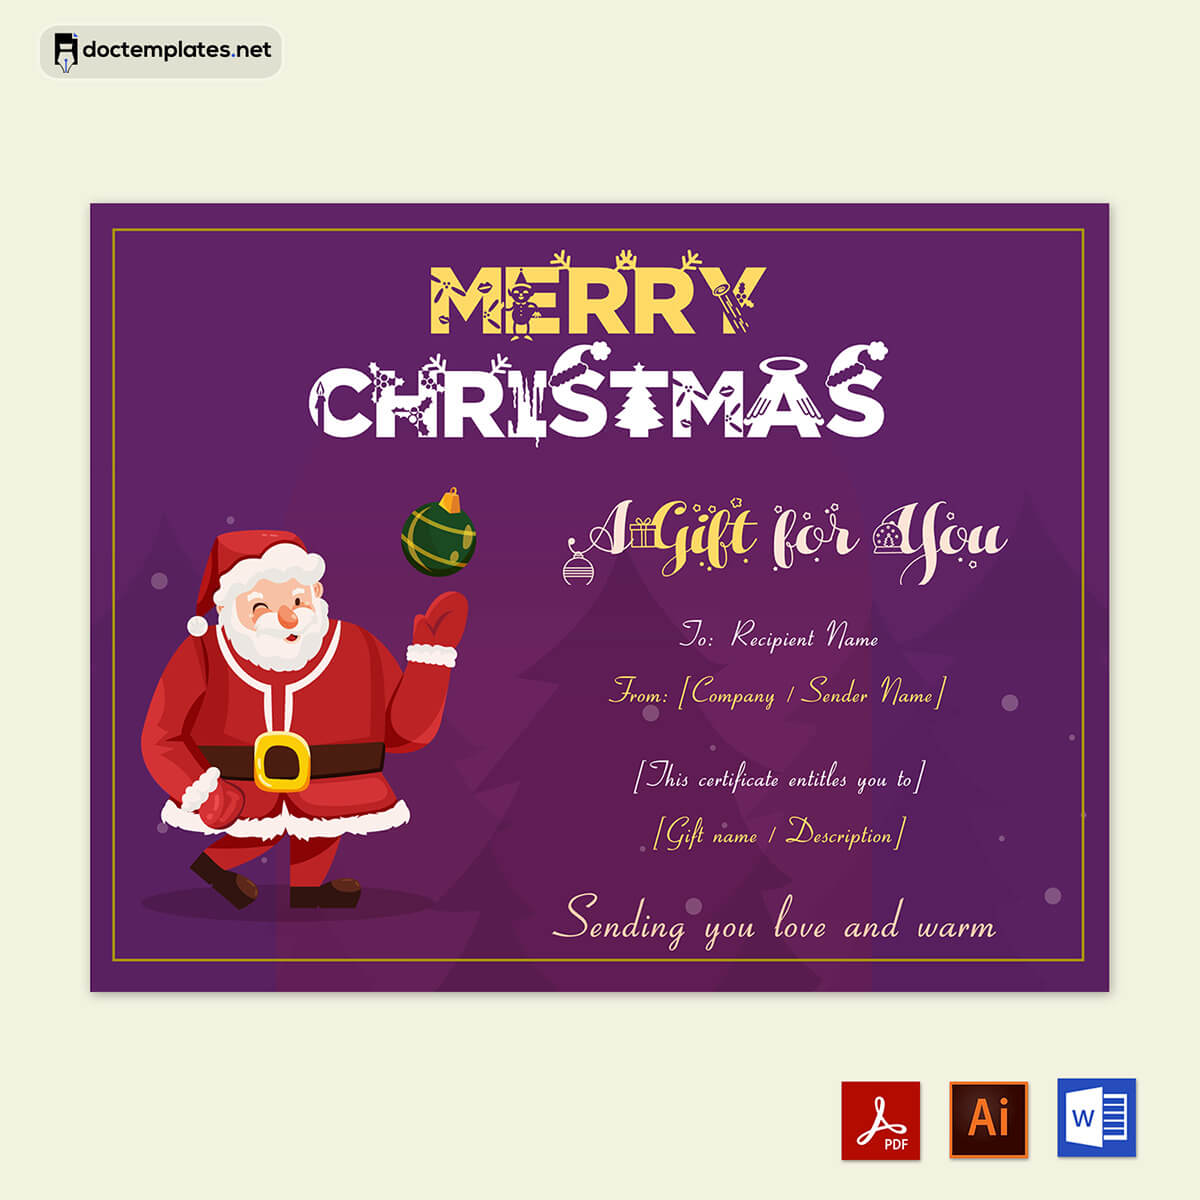 Image of Holiday Voucher Template Word
Holiday Voucher Template Word
01